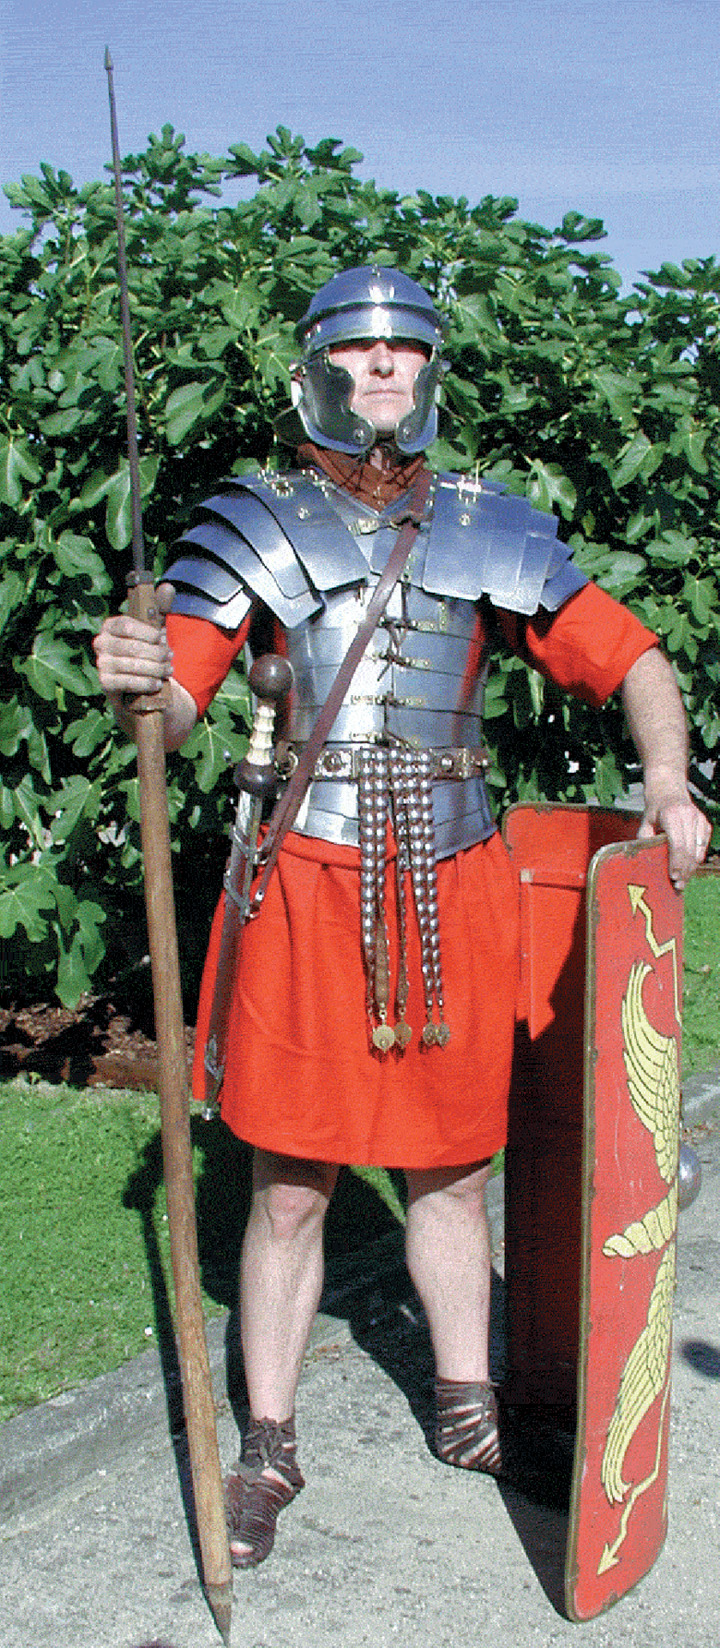 A legionary of the recreated Ermine Street Guard wears the typical clothing and equipment of the 1st- century Roman soldier. A volunteer living history group, the Guard’s primary focus is the accurate reconstruction of Roman military equipment. Based in England, the group is highly regarded by academics and maintains a Web site at www.esg.ndirect.co.uk